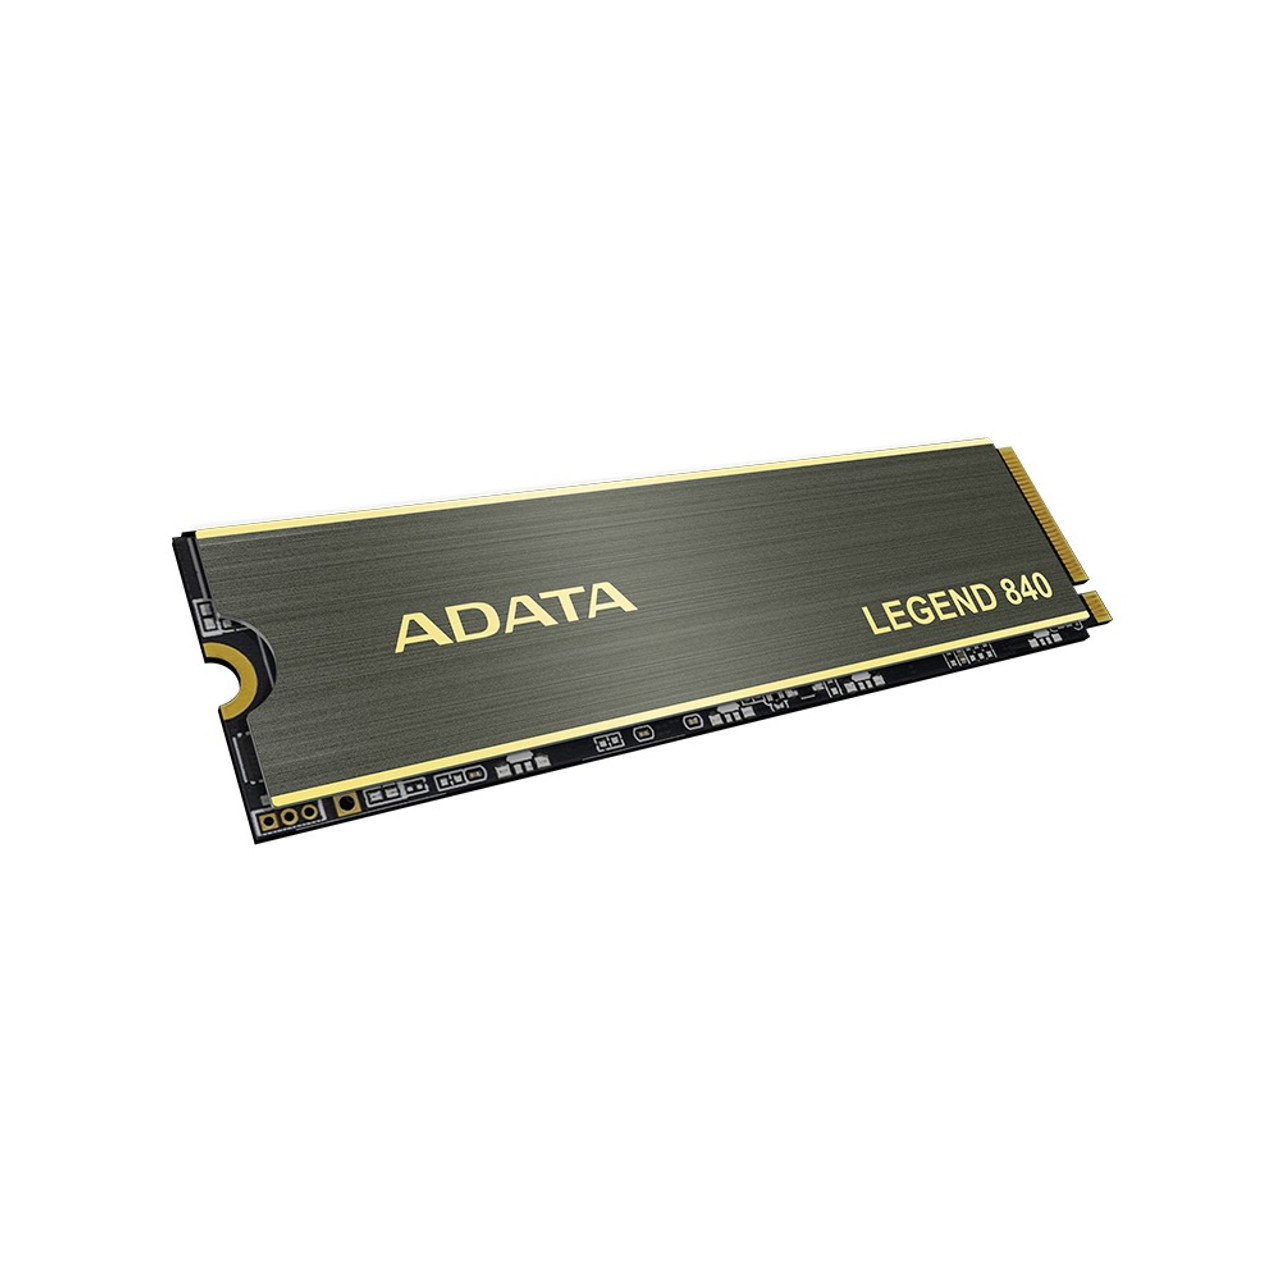 ADATA LEGEND 840 M.2 PCIe Internal Solid State Drive | PS5 Compatible - Innogrit IG5220 | Up to 5000 MBps - Grey/Gold SSD | 1PK - ADATA